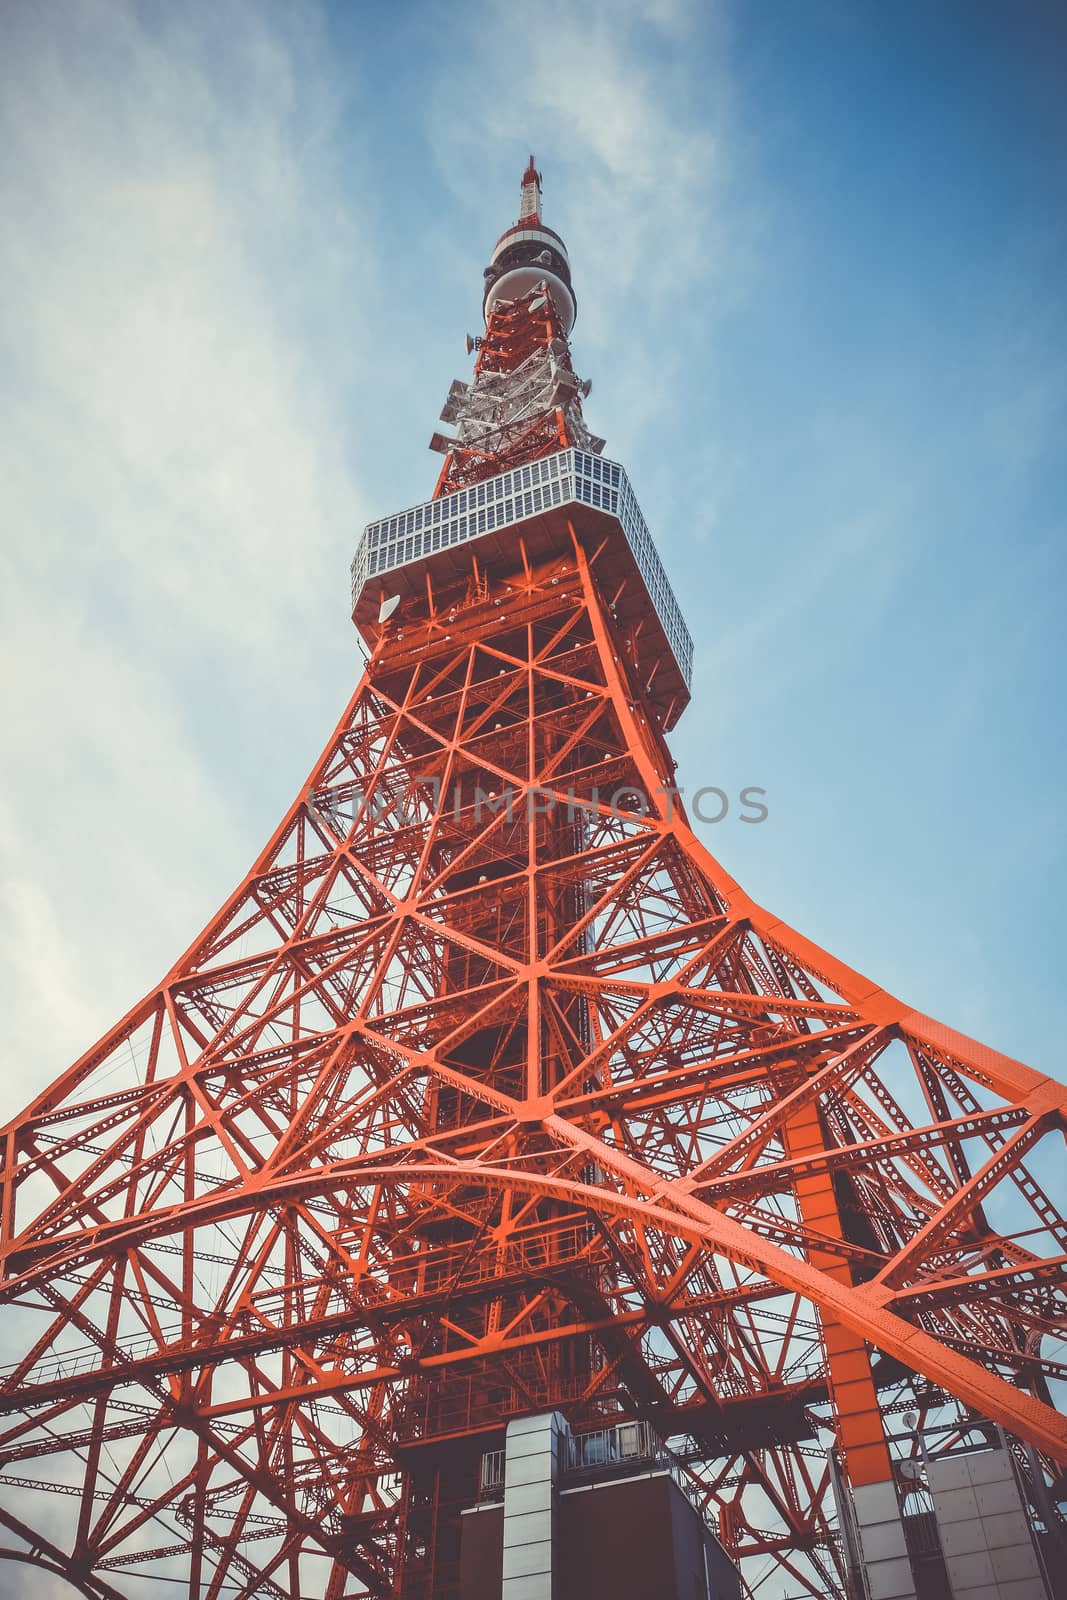 Tokyo tower on a blue sky background, Japan